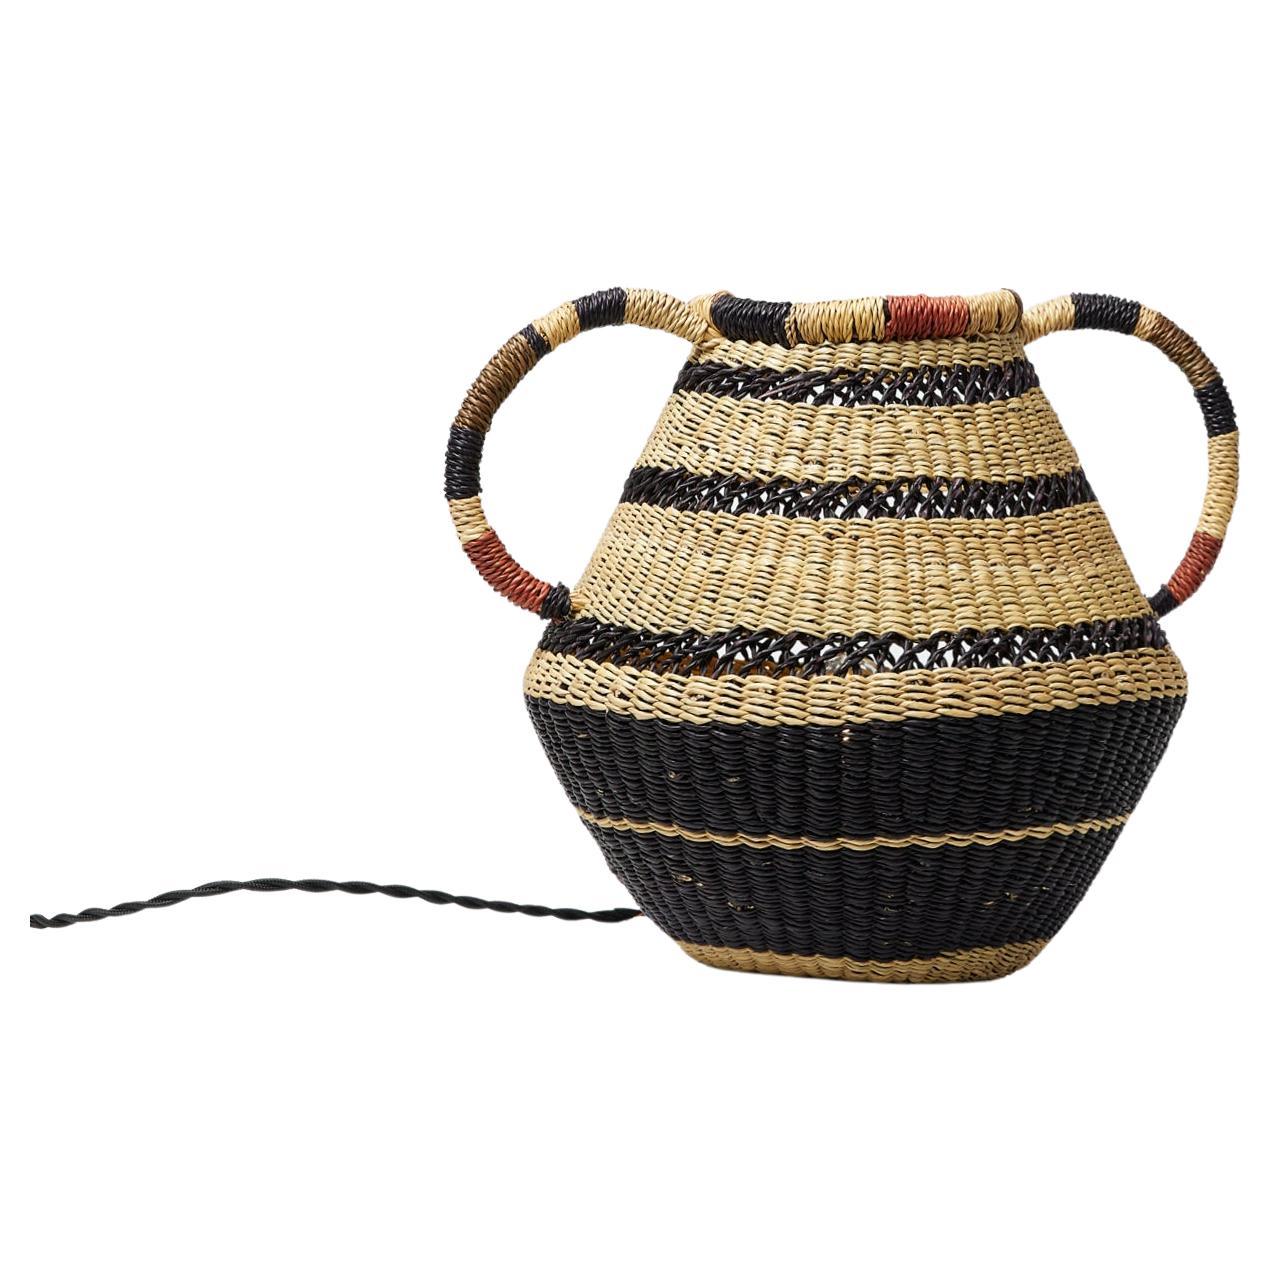 Contemporary Ethnic Small Pot Lamp Handwoven Straw Striped Handle